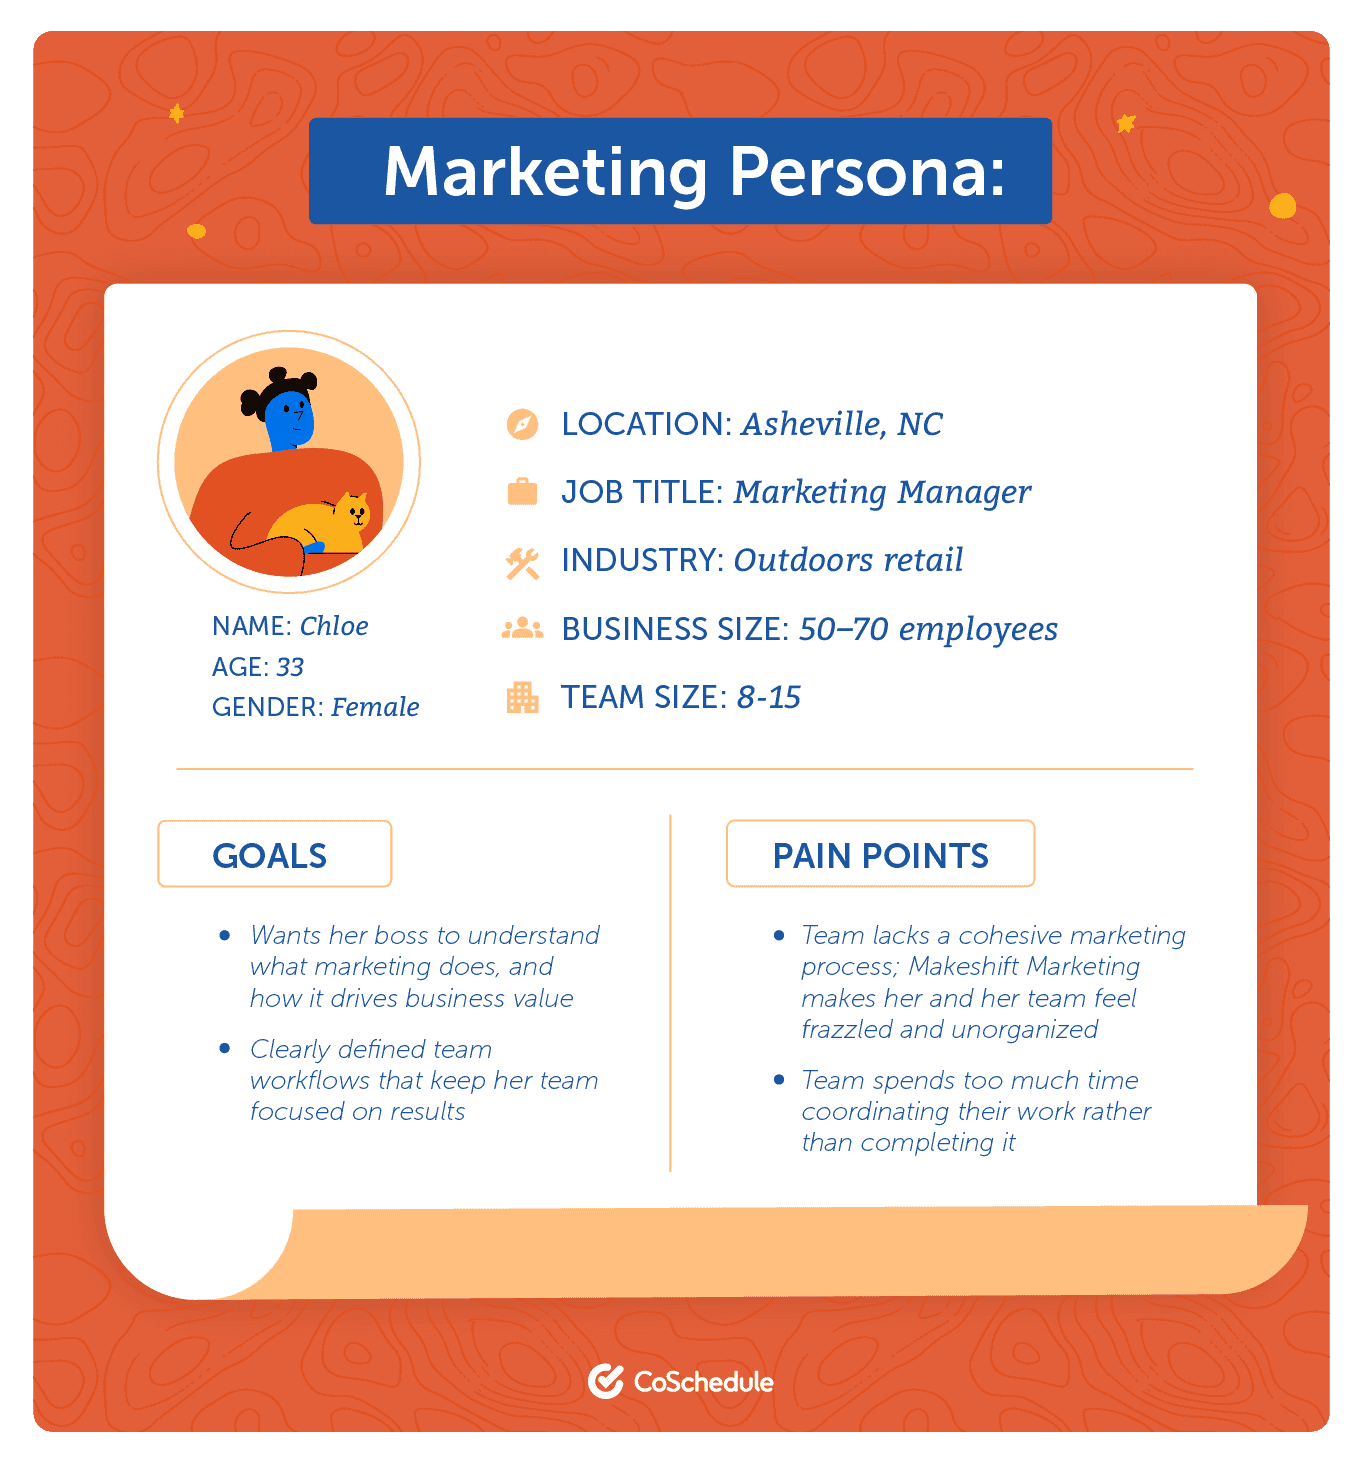 Marketing persona example with info of individual such as location, job title, industry, goals, pain points, etc.